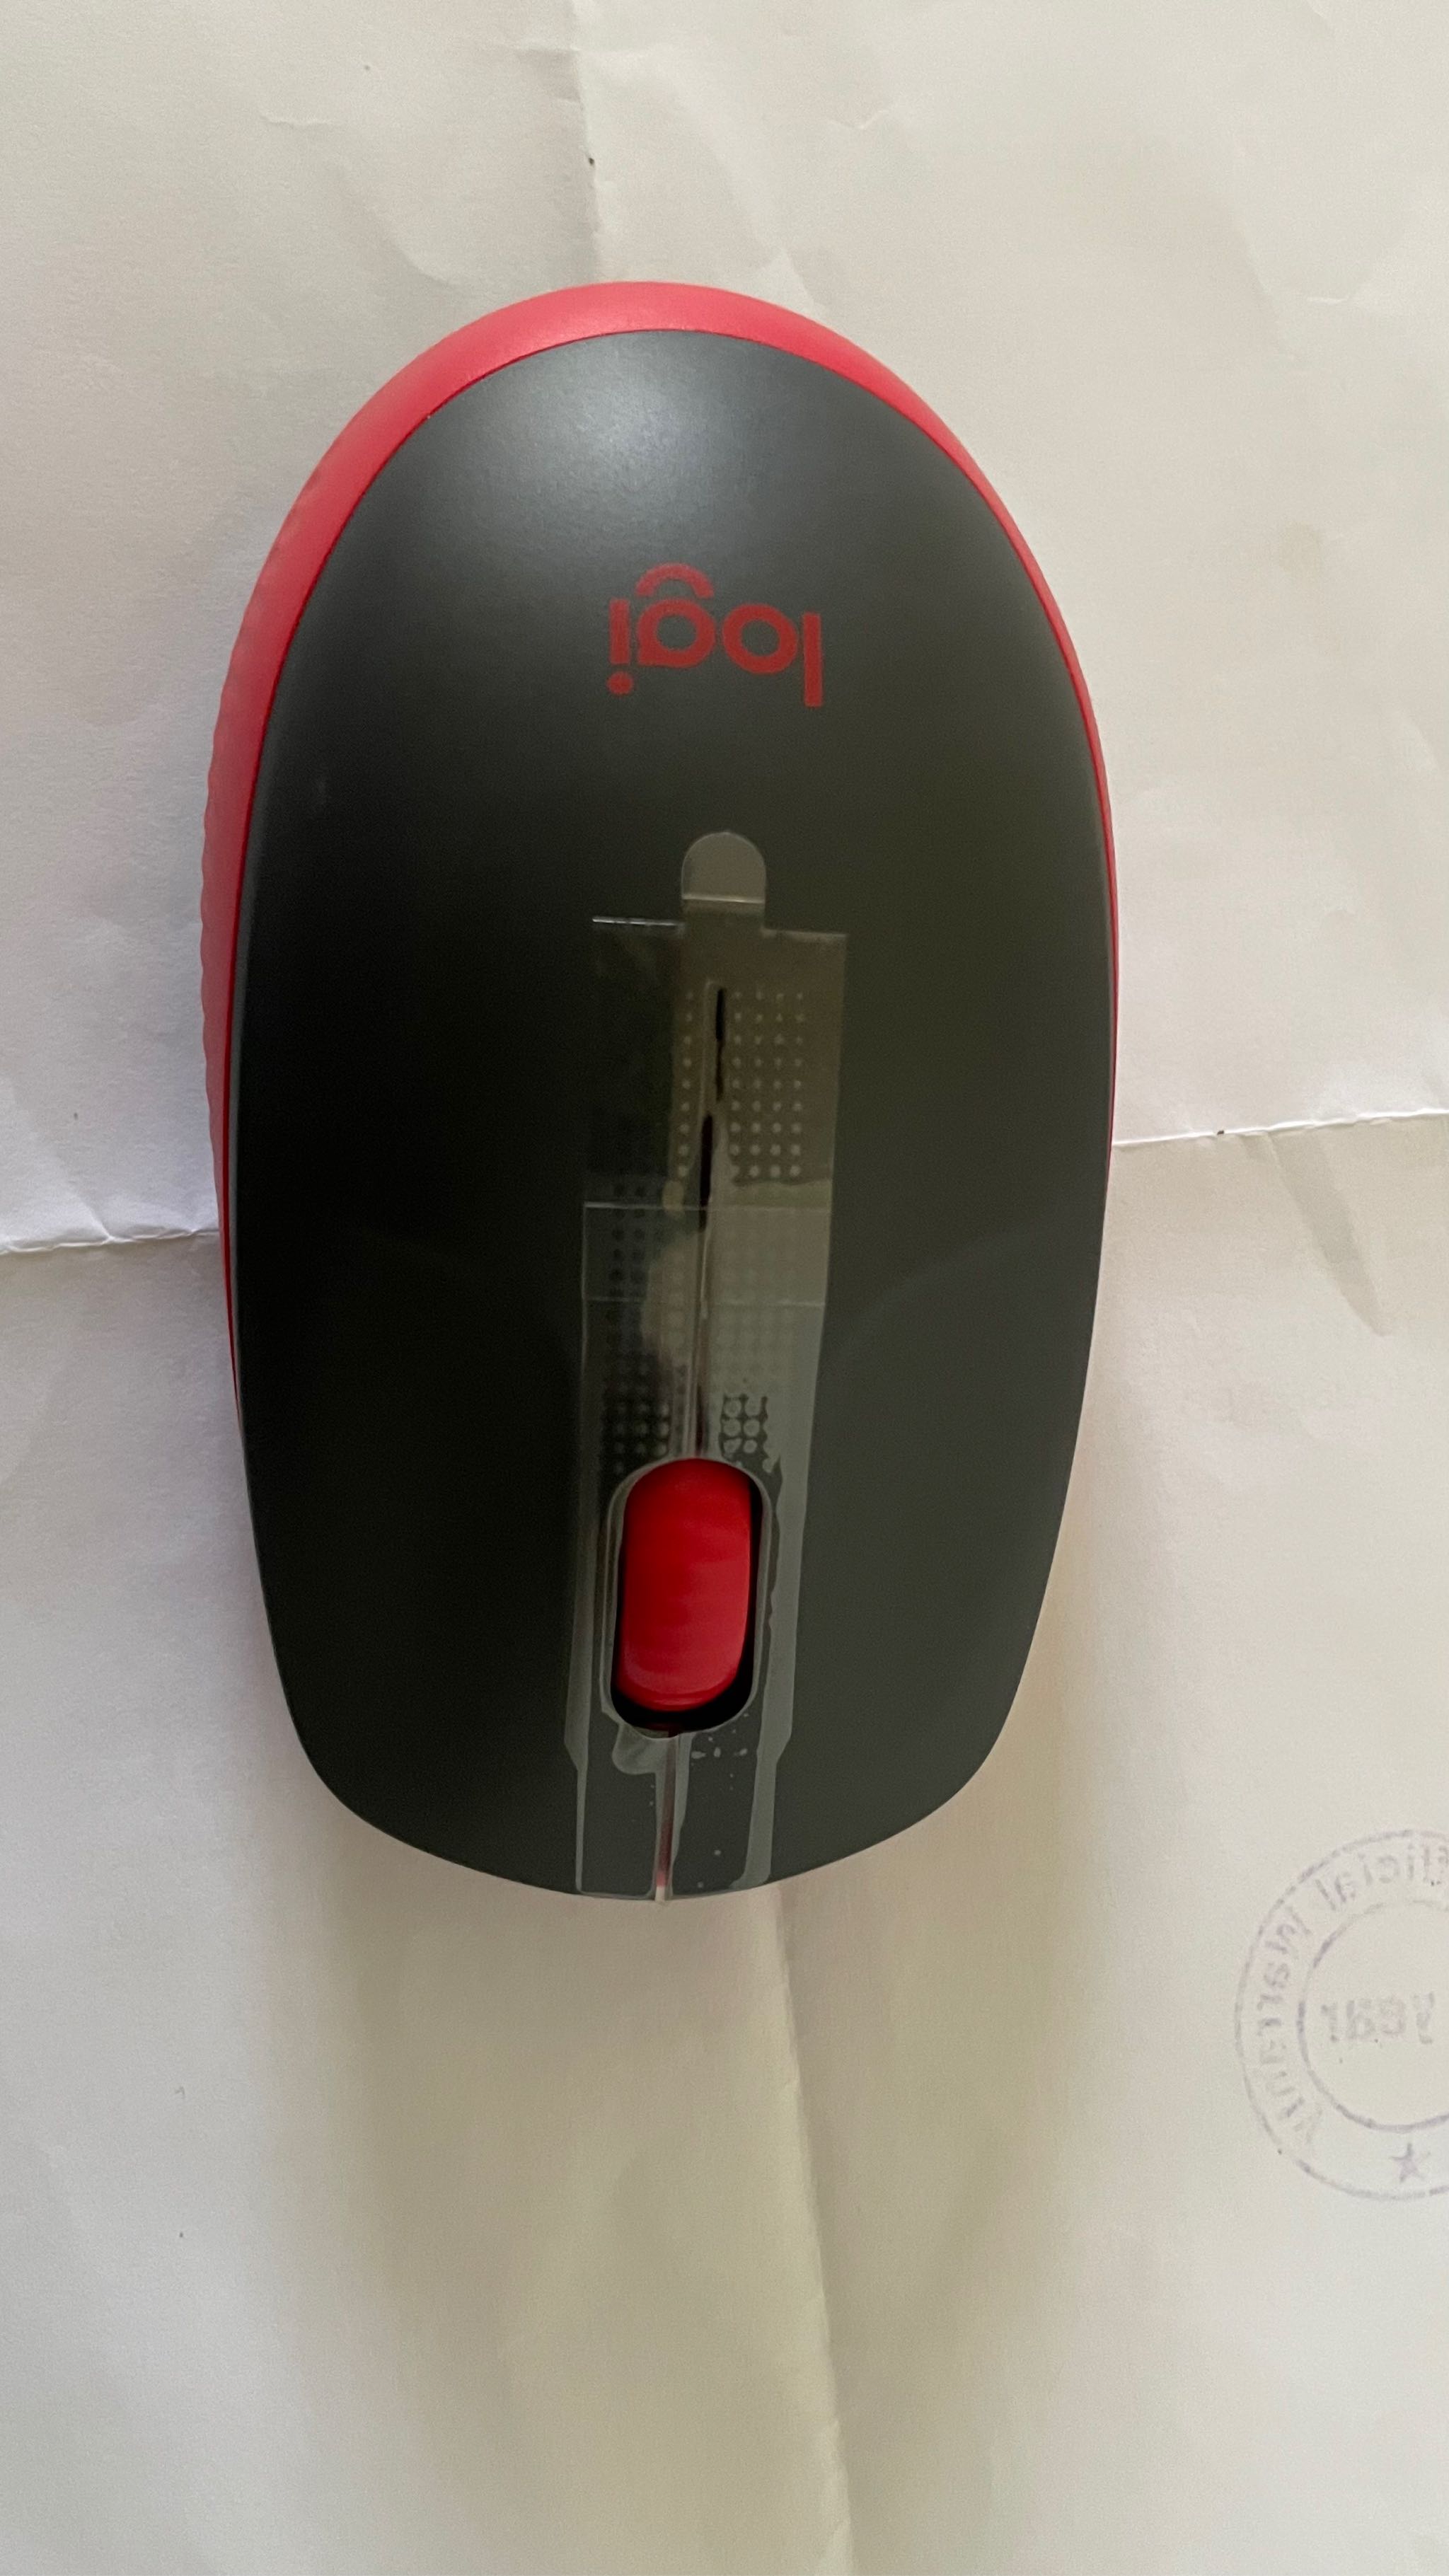 LOGITECH M190 FULL-SIZE WIRELESS MOUSE RED